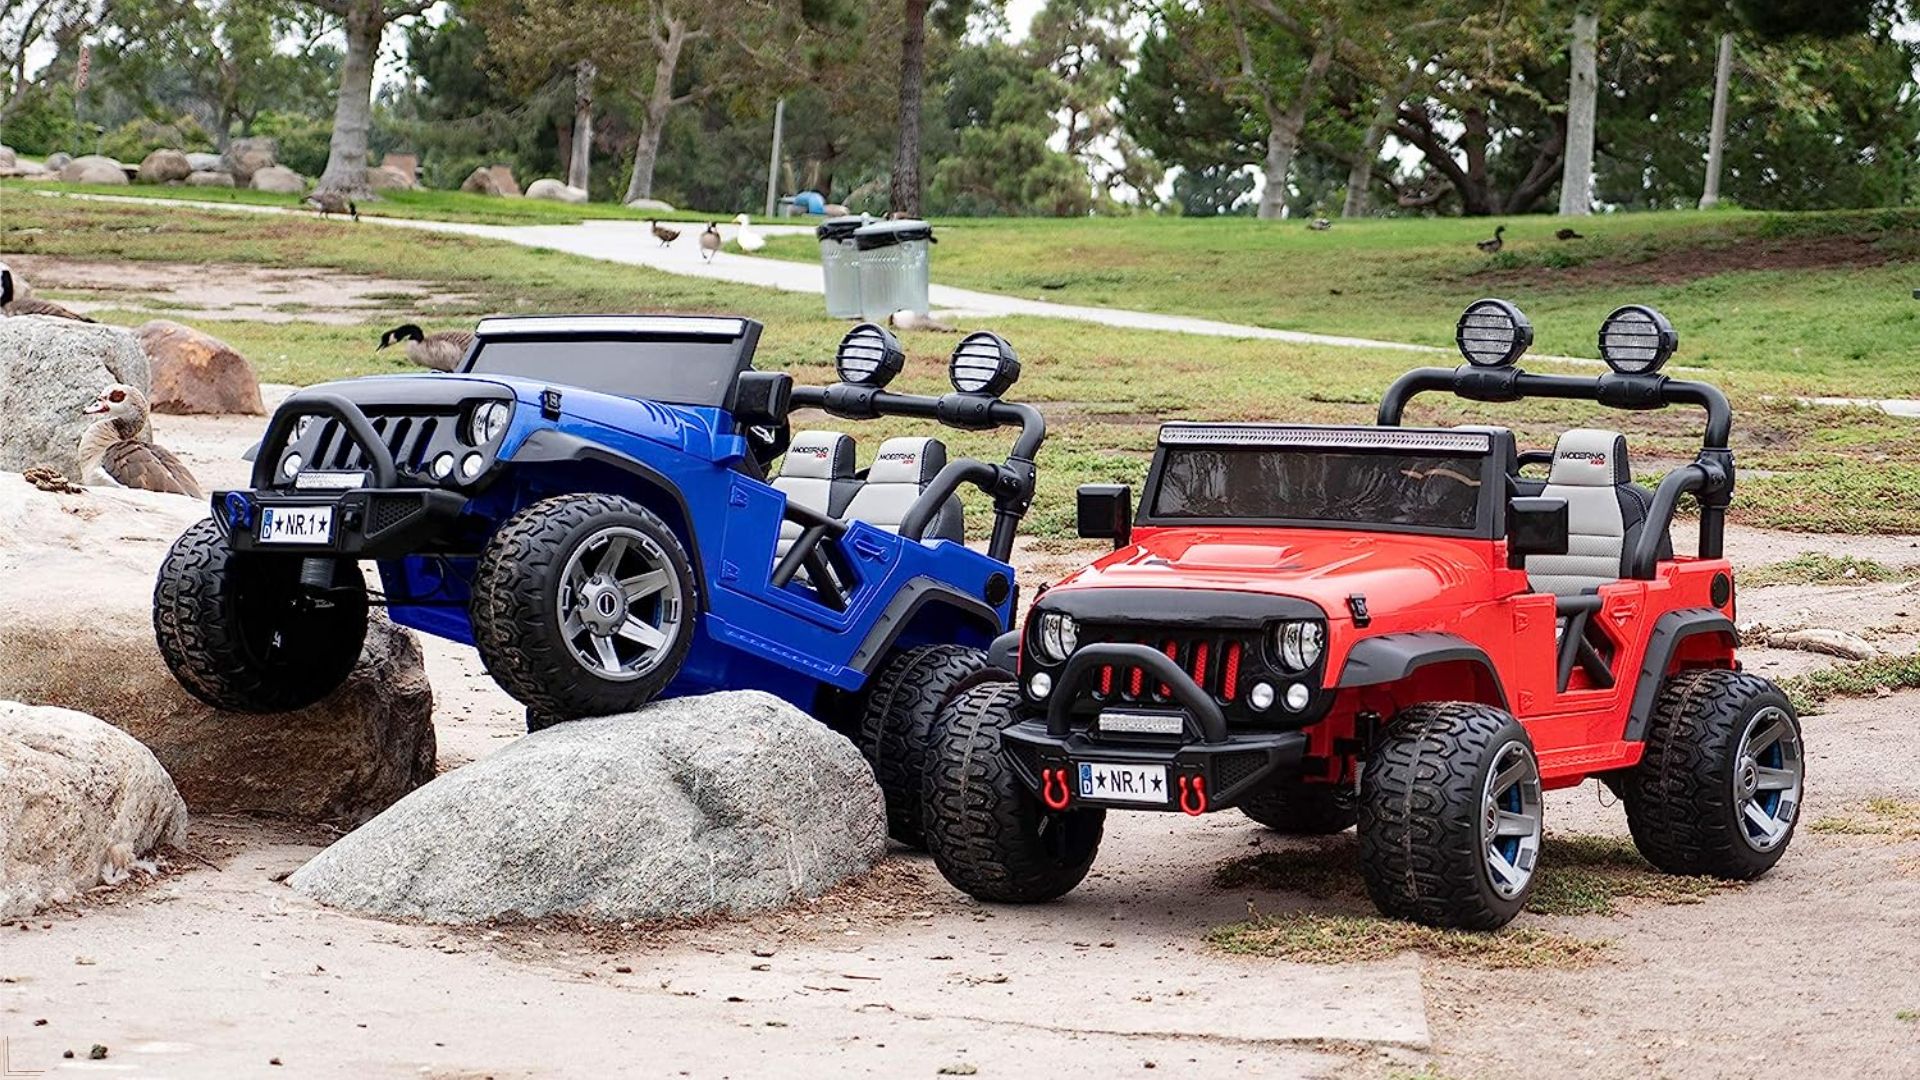 How Long Do Power Wheels Take To Charge